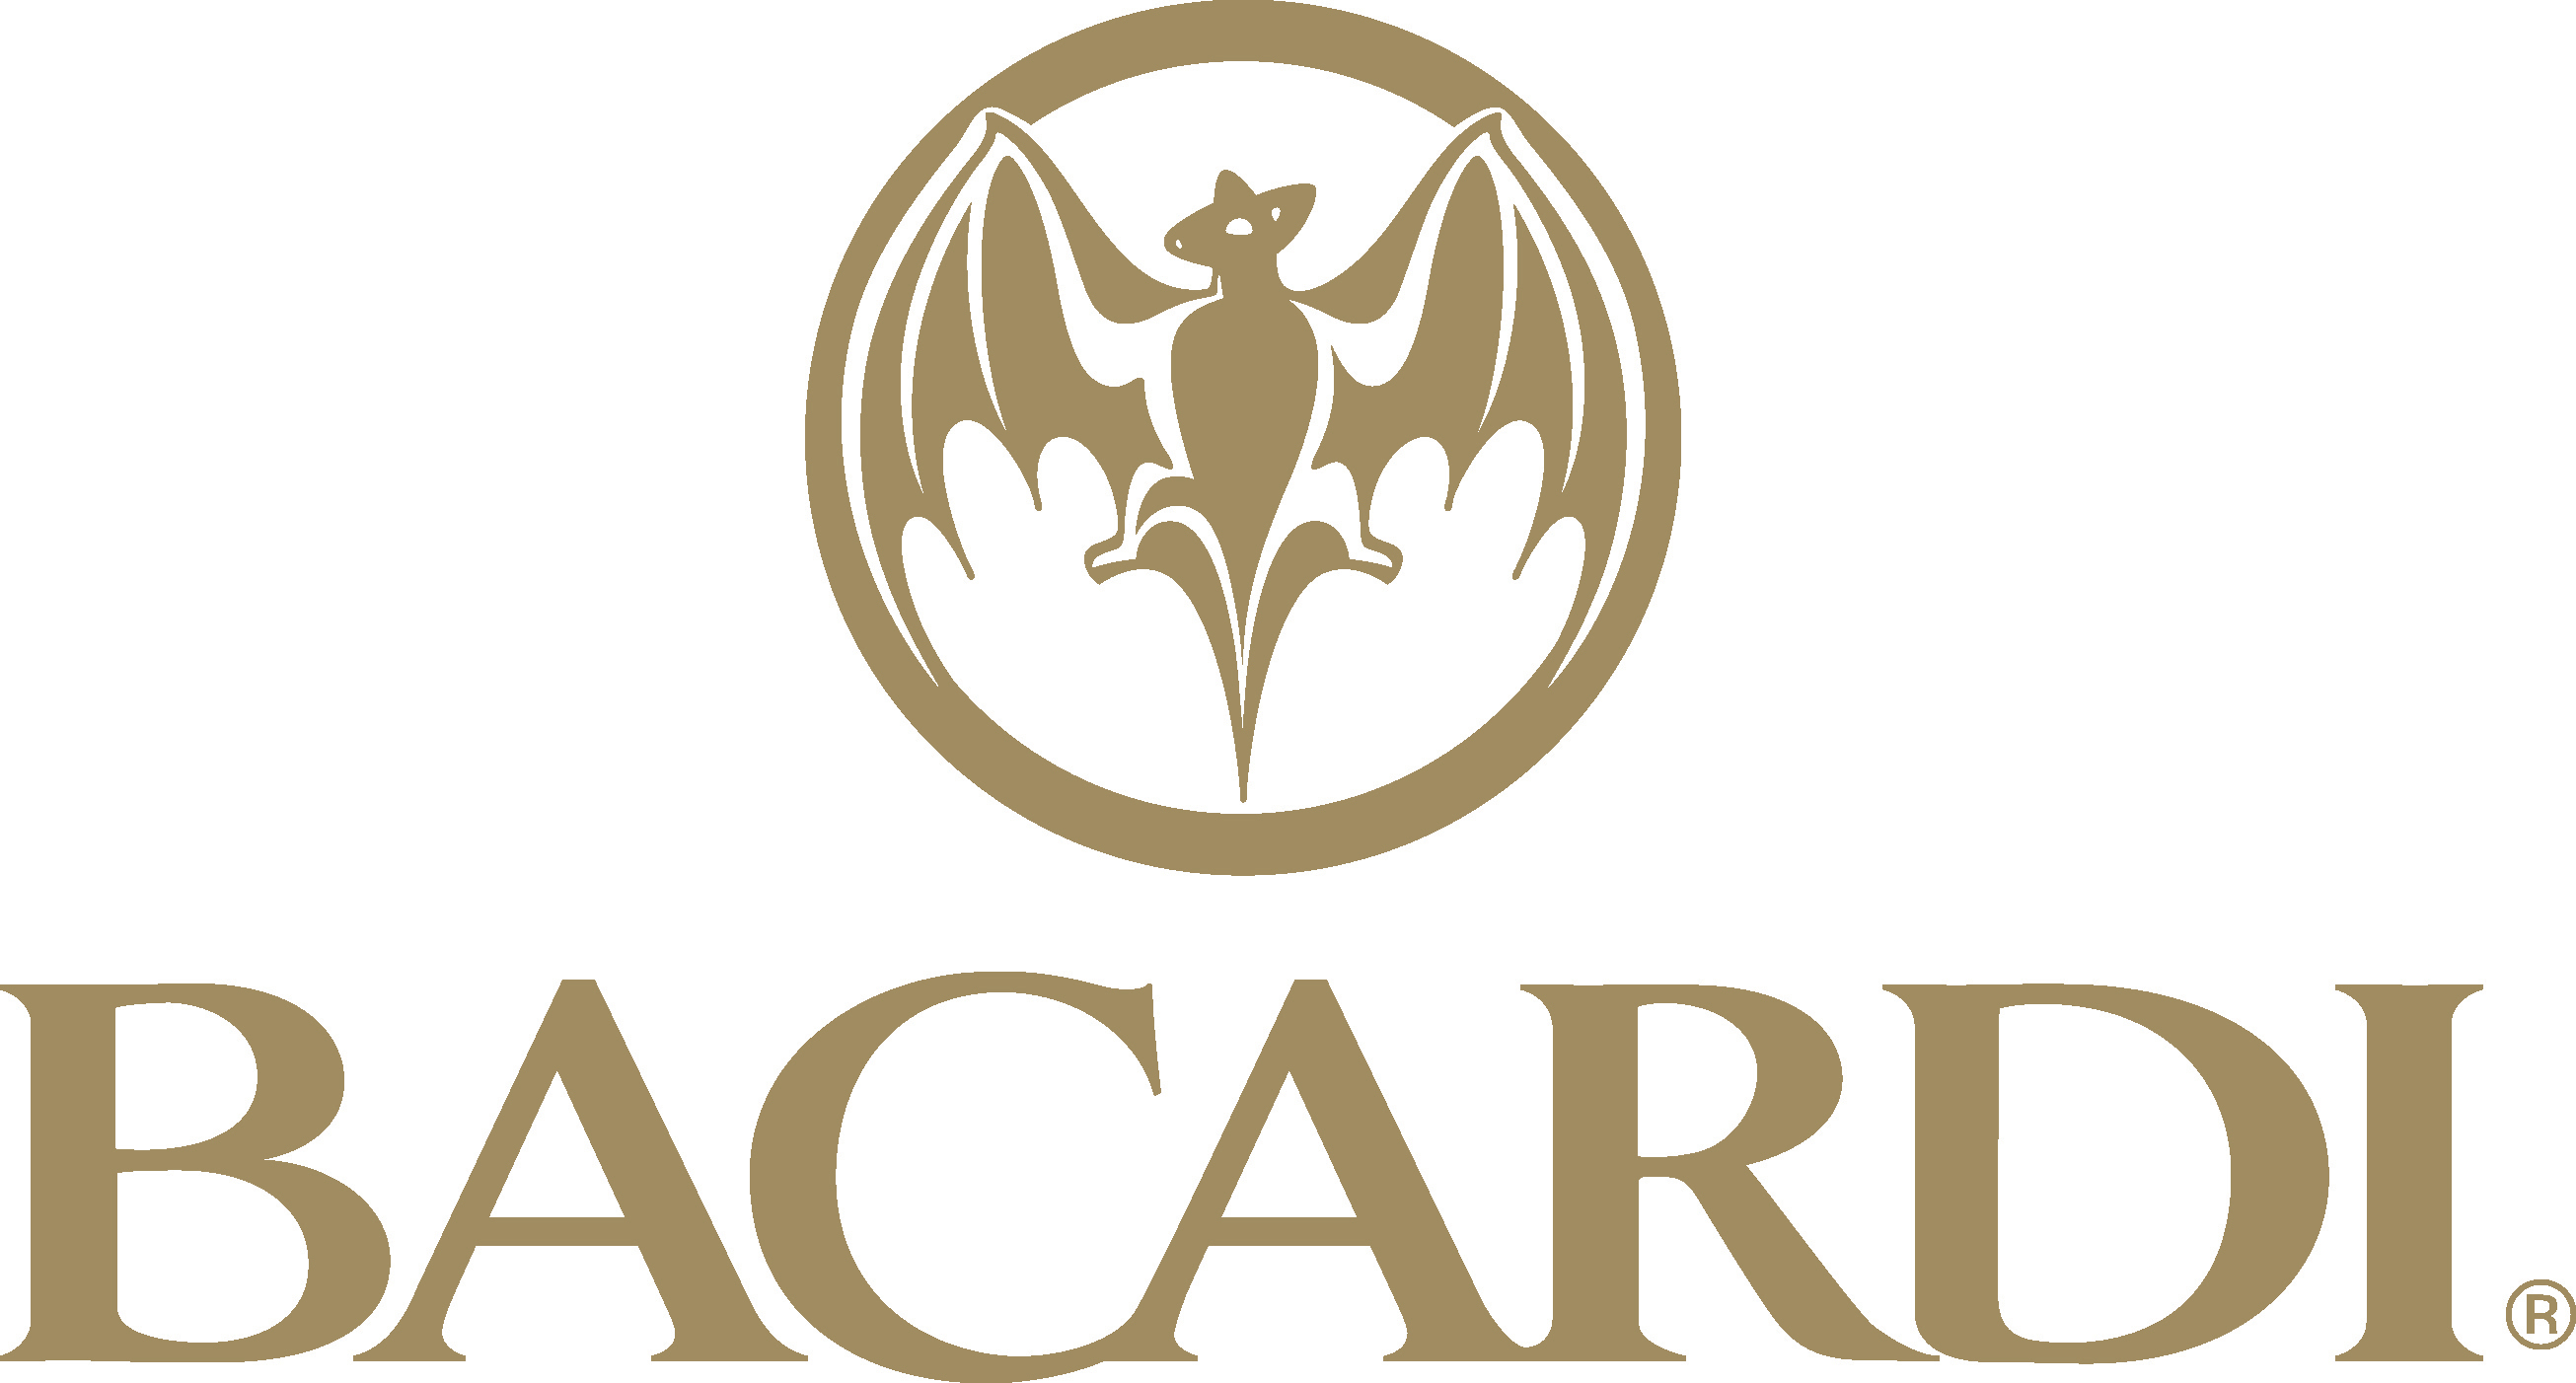 Bacardi to Acquire Patrón Tequila | Business Wire